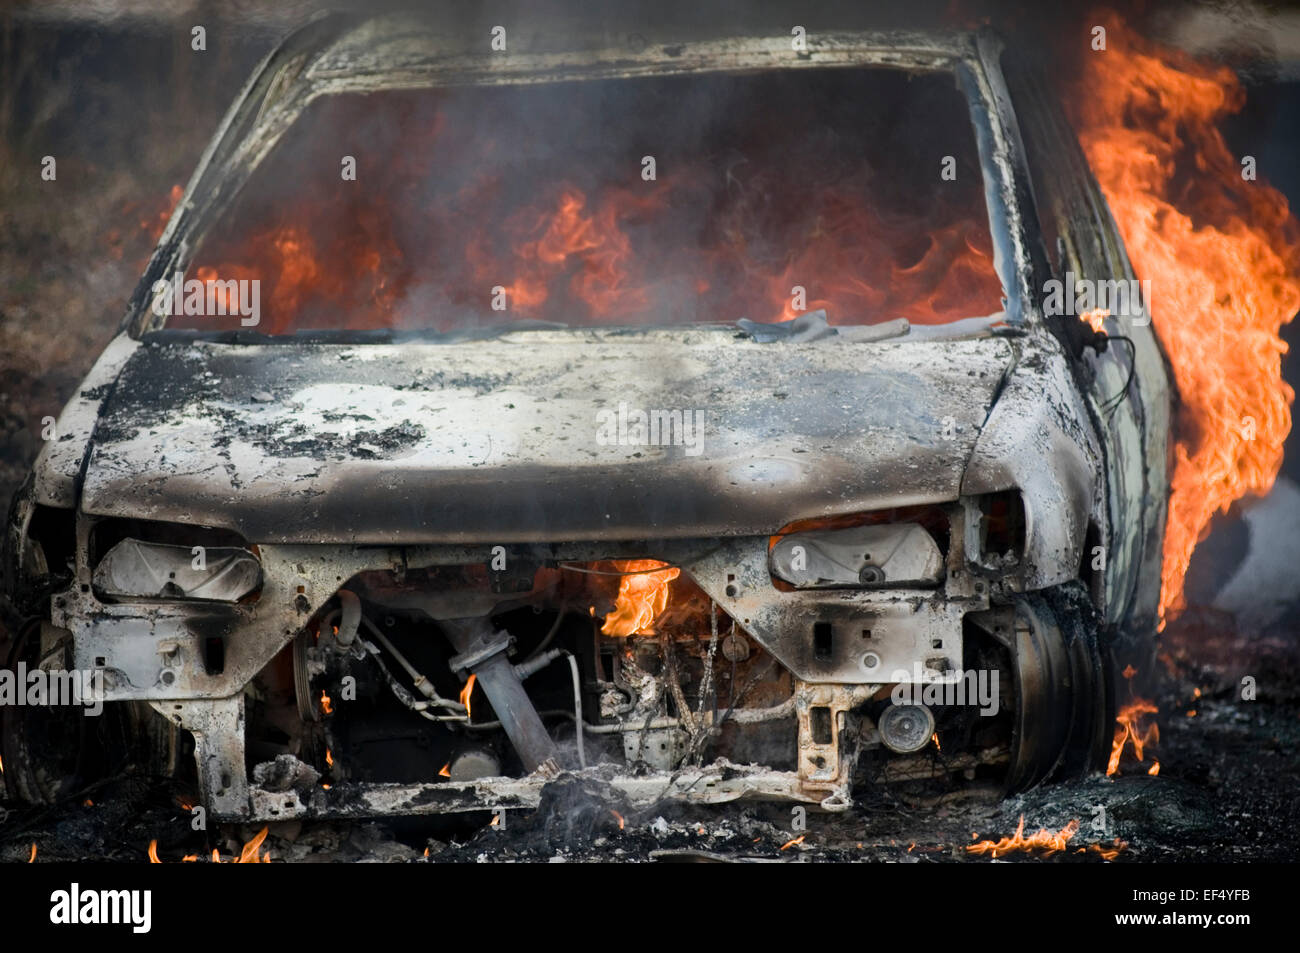 car fire fires engine flame flames up in smoke intense heat leaping insurance burning burn raging fireball toxic on third party Stock Photo